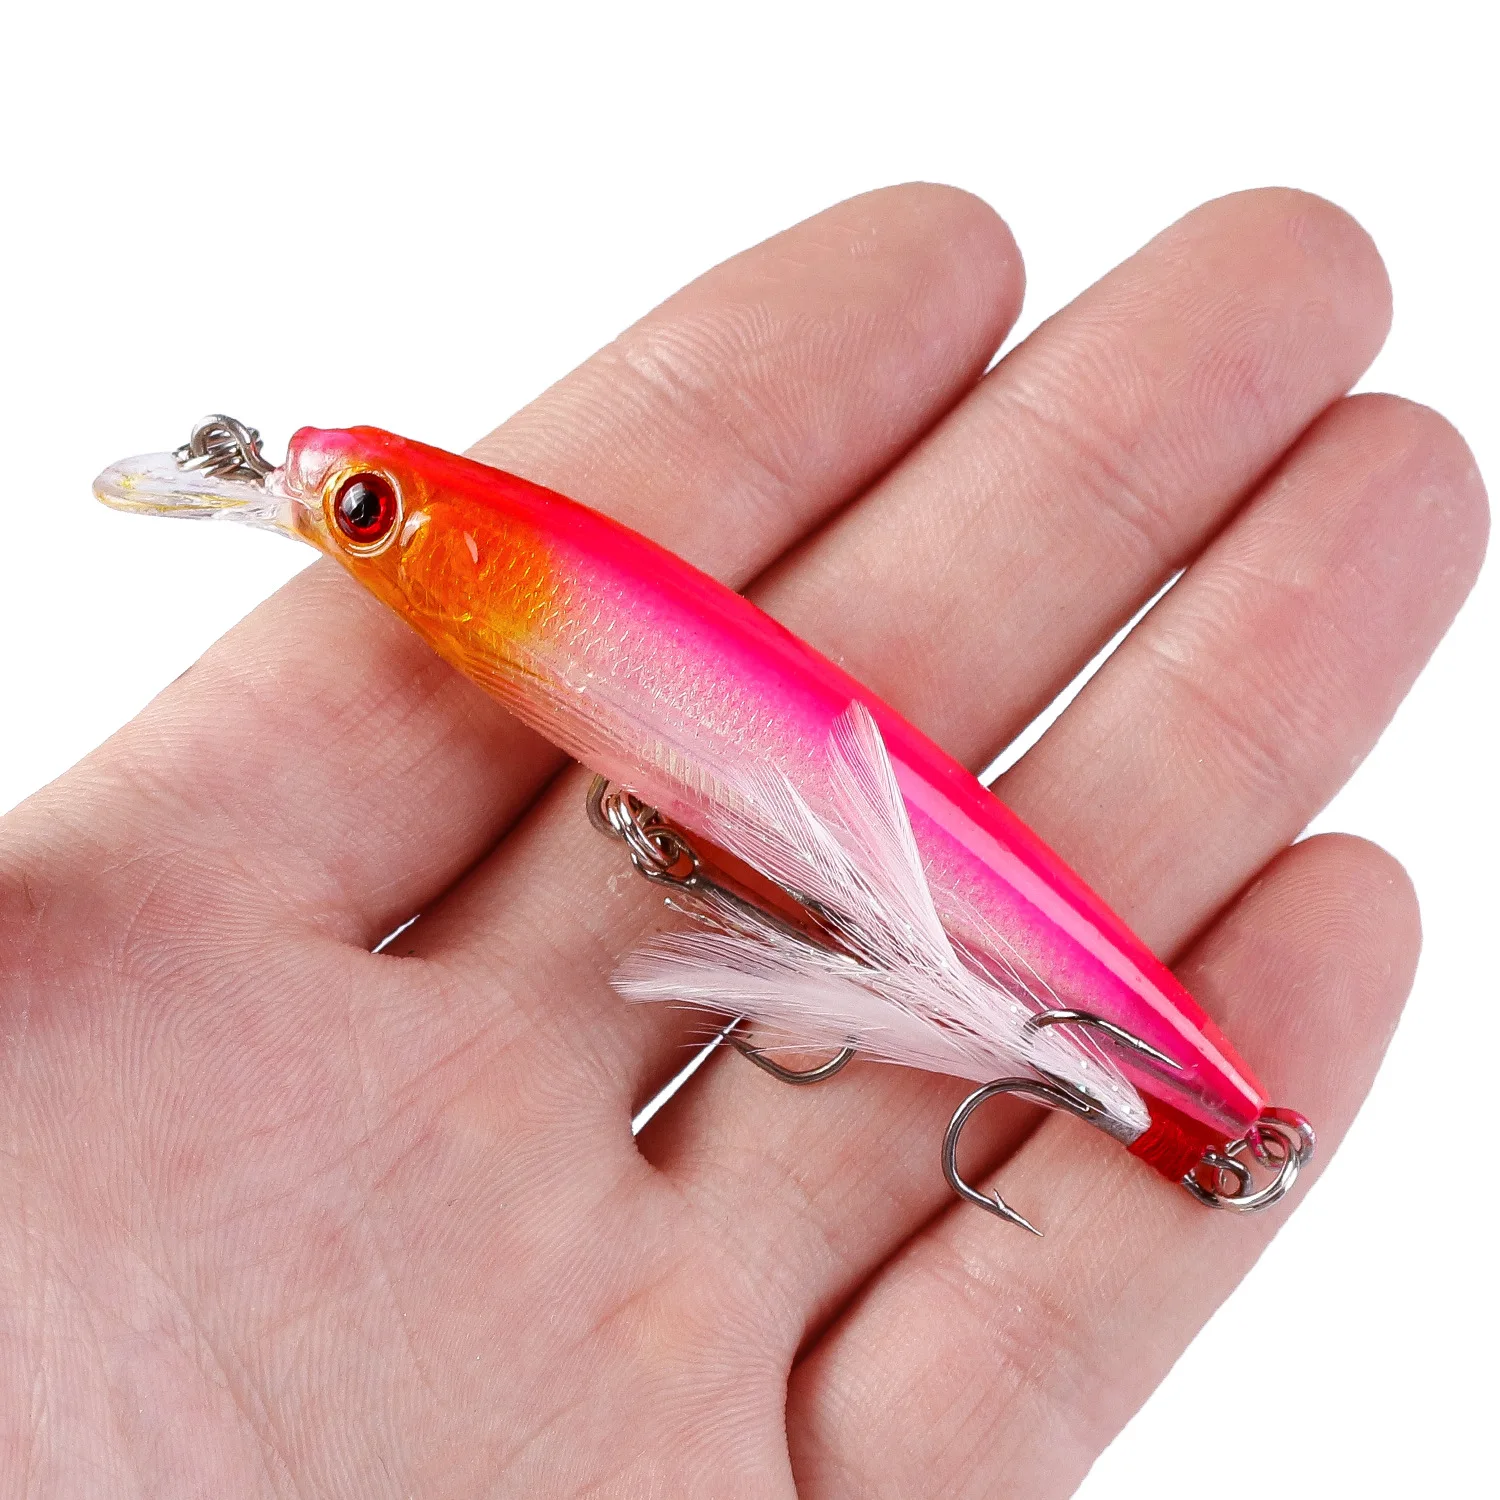 https://ae01.alicdn.com/kf/H22bb4475b7624313a47be818f1aeb7a6I/DHYJSFDC-1Pcs-Laser-3D-Eyes-Bionic-Minnow-Fishing-Lure-90mm-7-2g-Artificial-Hard-Bait-with.jpg